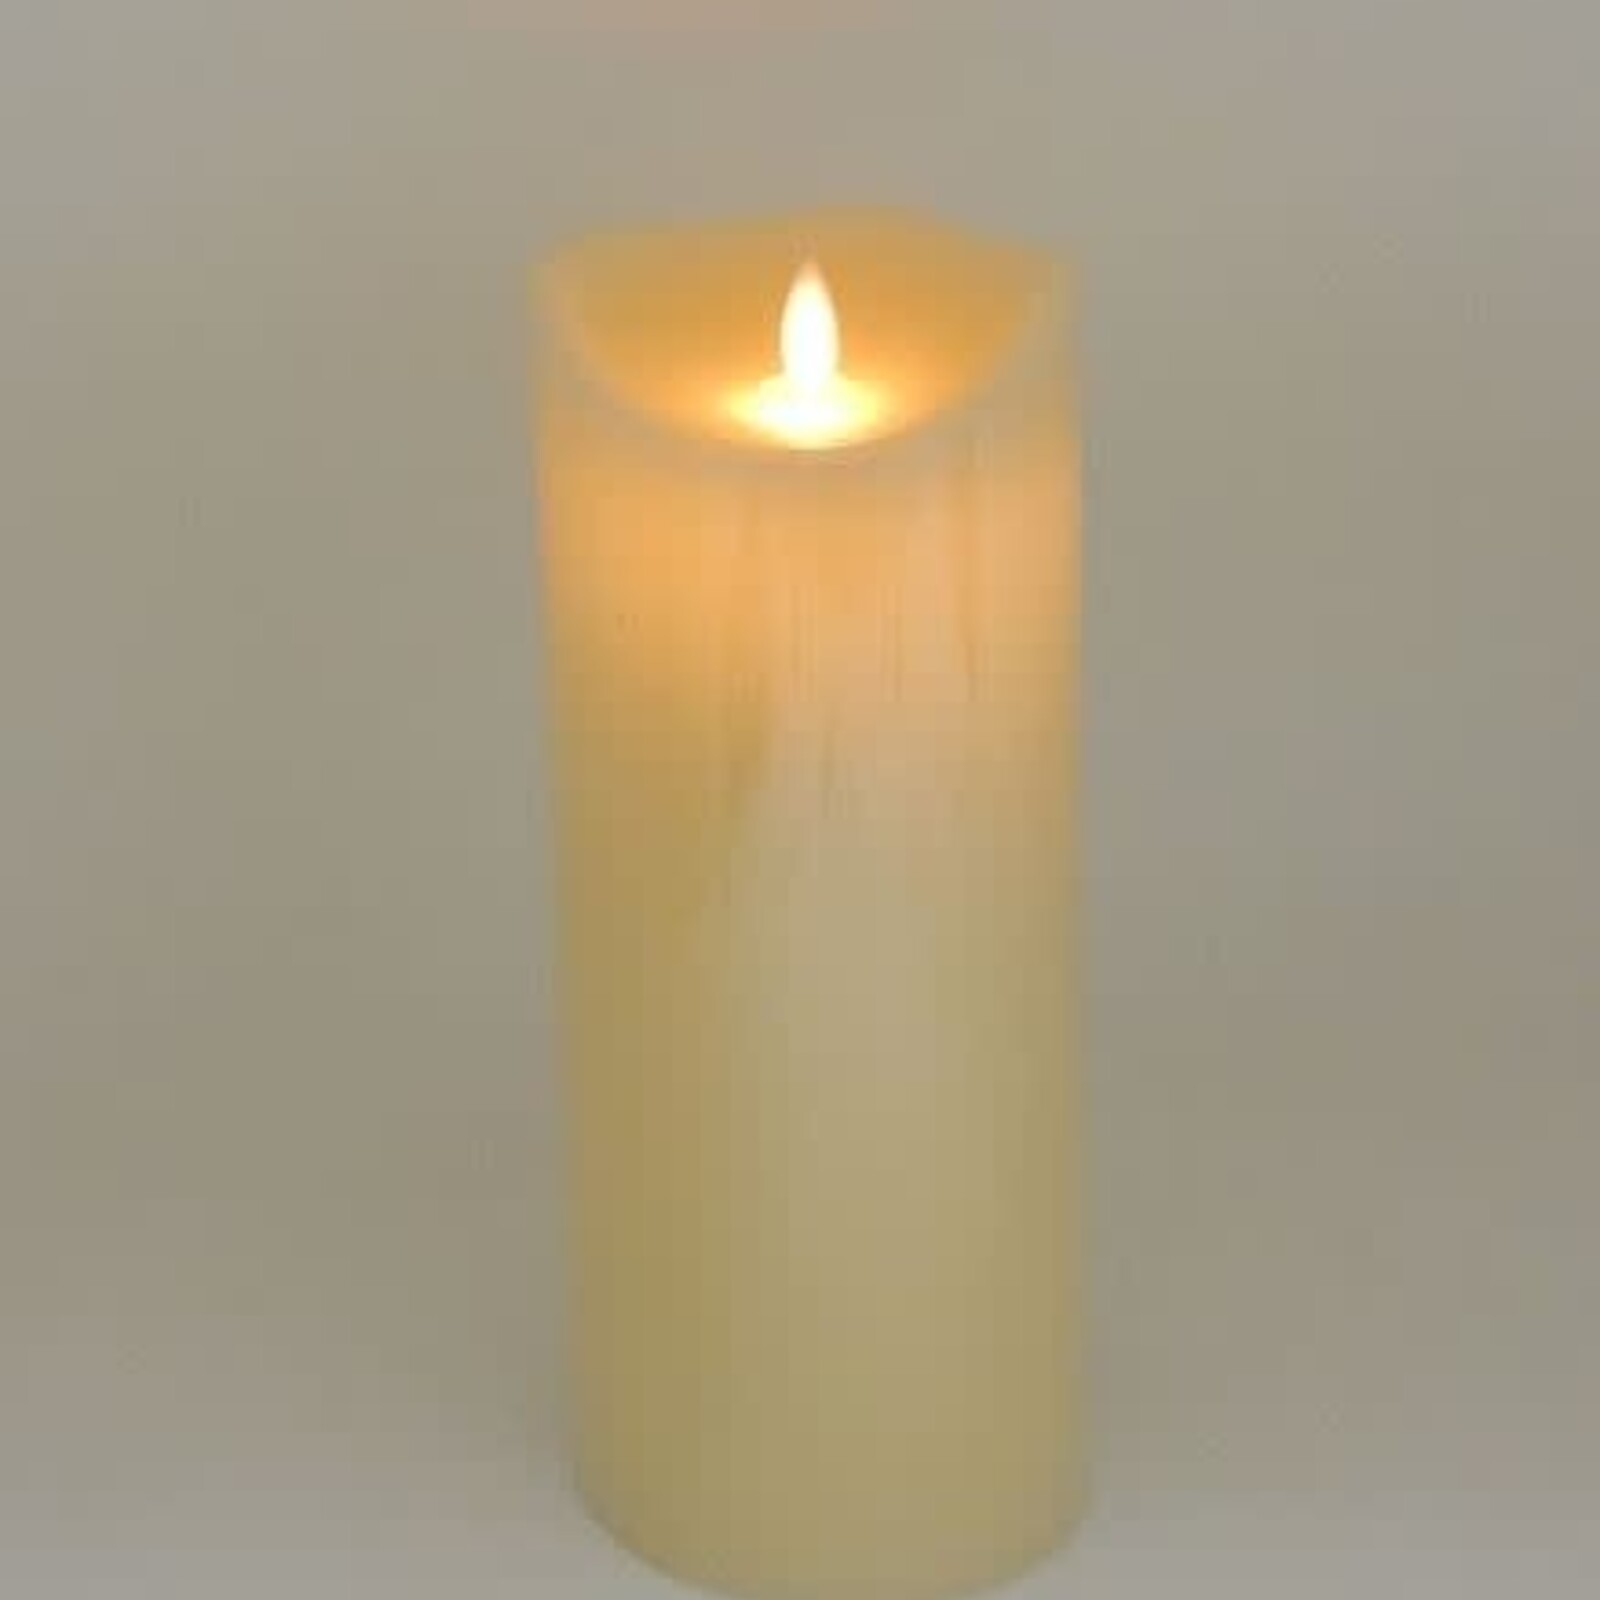 Green Pasture 4" X 10" LED Flickering  candle Cream, 6 hours timer  LE05W loading=